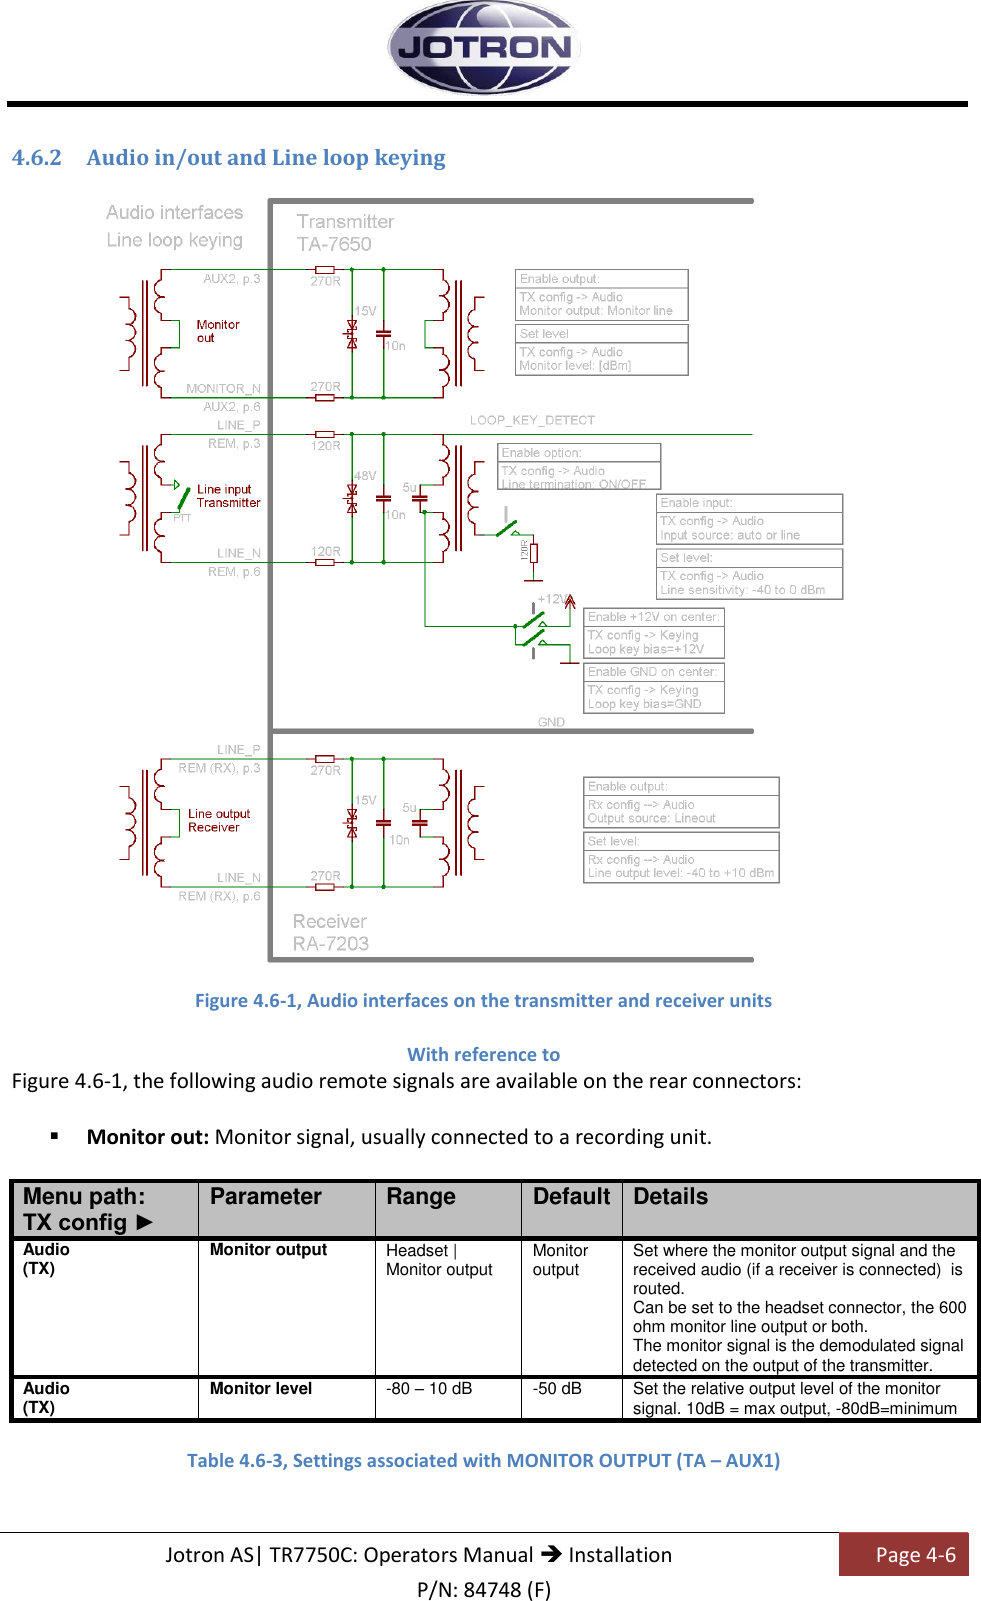   Jotron AS| TR7750C: Operators Manual  Installation Page 4-6 P/N: 84748 (F) 4.6.2 Audio in/out and Line loop keying    Figure 4.6-1, Audio interfaces on the transmitter and receiver units  With reference to  Figure 4.6-1, the following audio remote signals are available on the rear connectors:   Monitor out: Monitor signal, usually connected to a recording unit.  Menu path: TX config ► Parameter Range Default Details Audio (TX) Monitor output Headset | Monitor output Monitor output Set where the monitor output signal and the received audio (if a receiver is connected)  is routed.  Can be set to the headset connector, the 600 ohm monitor line output or both. The monitor signal is the demodulated signal detected on the output of the transmitter. Audio (TX) Monitor level -80 – 10 dB -50 dB Set the relative output level of the monitor signal. 10dB = max output, -80dB=minimum  Table 4.6-3, Settings associated with MONITOR OUTPUT (TA – AUX1)    